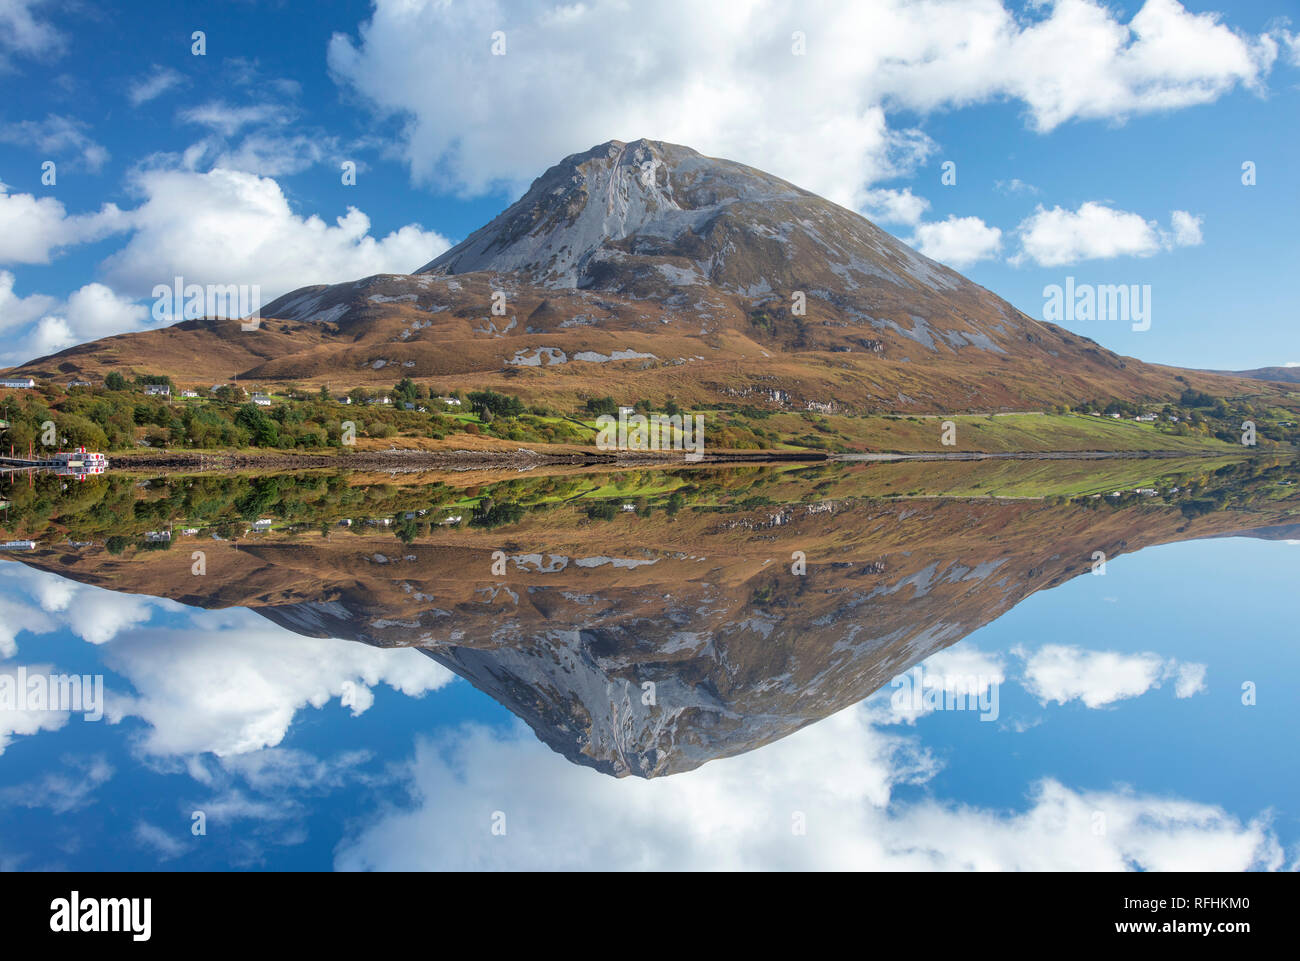 Perfekte Reflektion der Errigal Mountain in Dunlewy Lough. County Donegal, Irland. Stockfoto